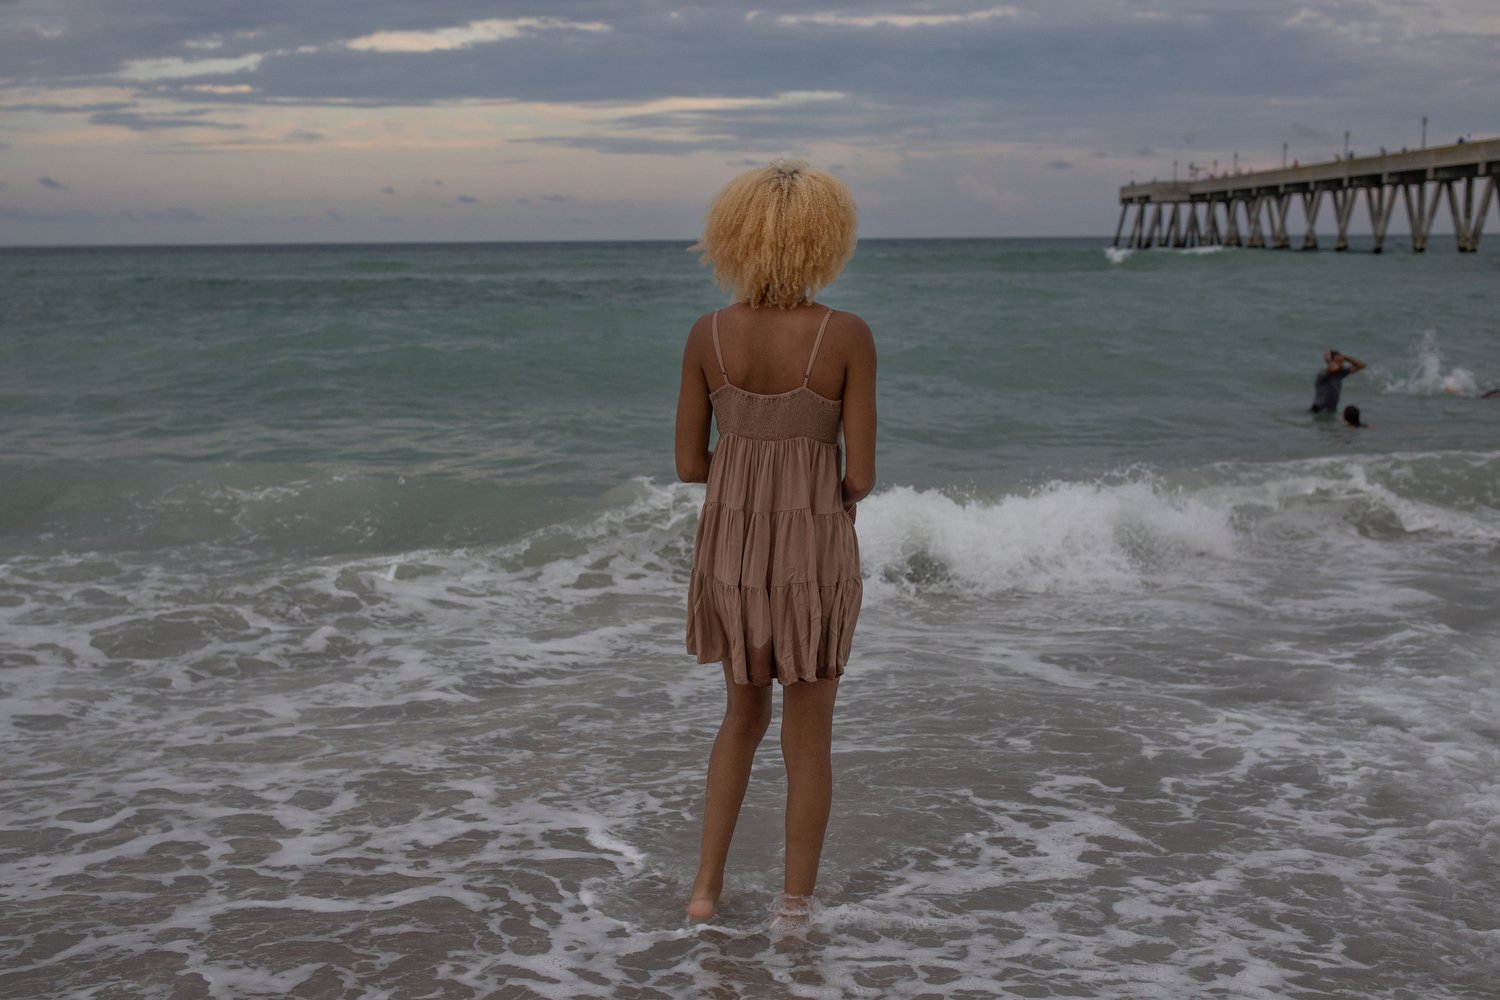  Tyanna Grissett stands in the surf as the sun goes down at Wrightsville Beach, North Carolina. With heat indexes soaring into the 100s in North Carolina, many beachgoers are opting to visit in the evening when it’s cooler.  For The Washington Post 